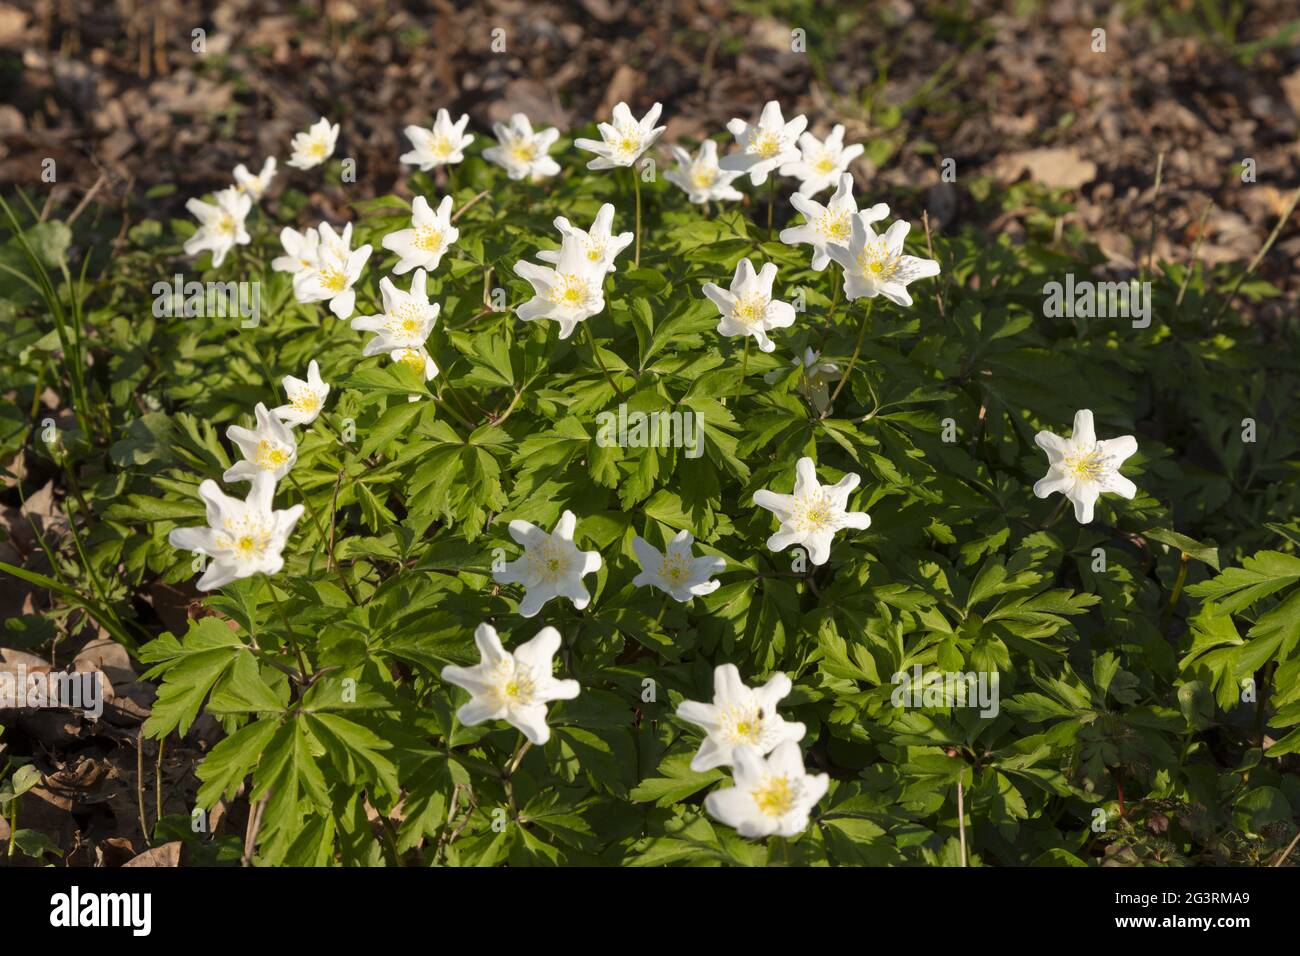 Blossom wood anemone at spring time Stock Photo